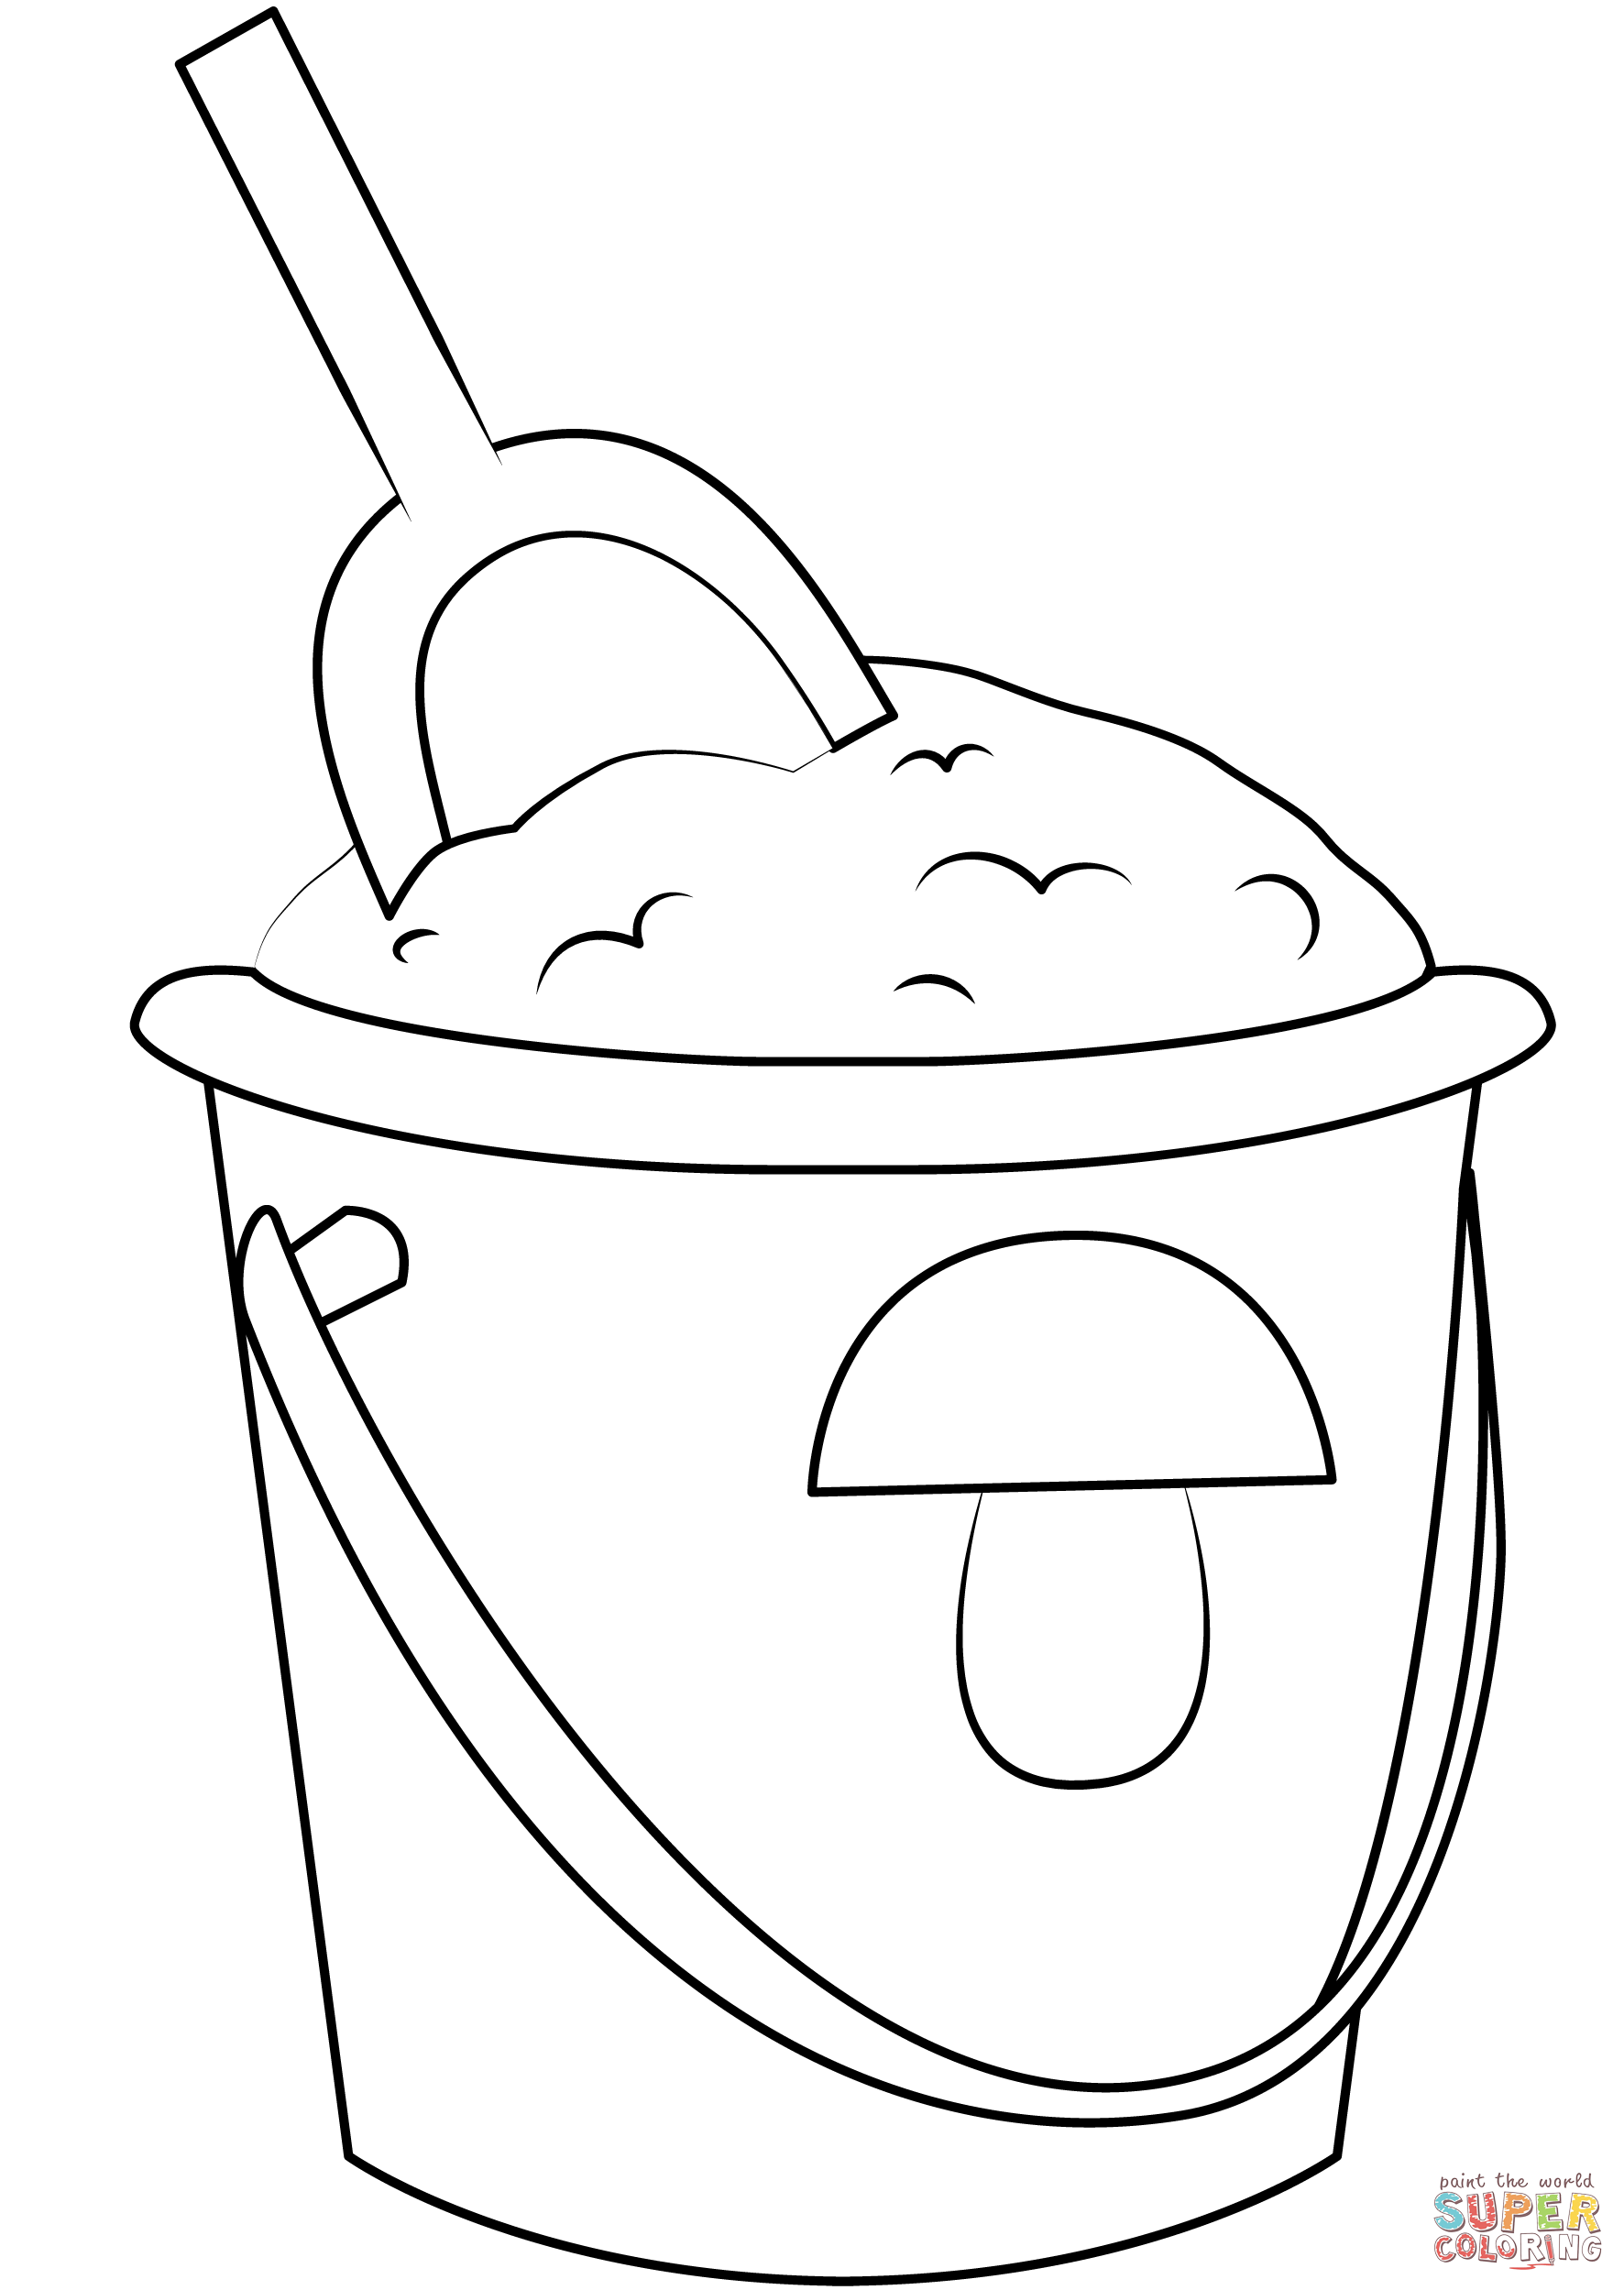 Sand bucket coloring page free printable coloring pages